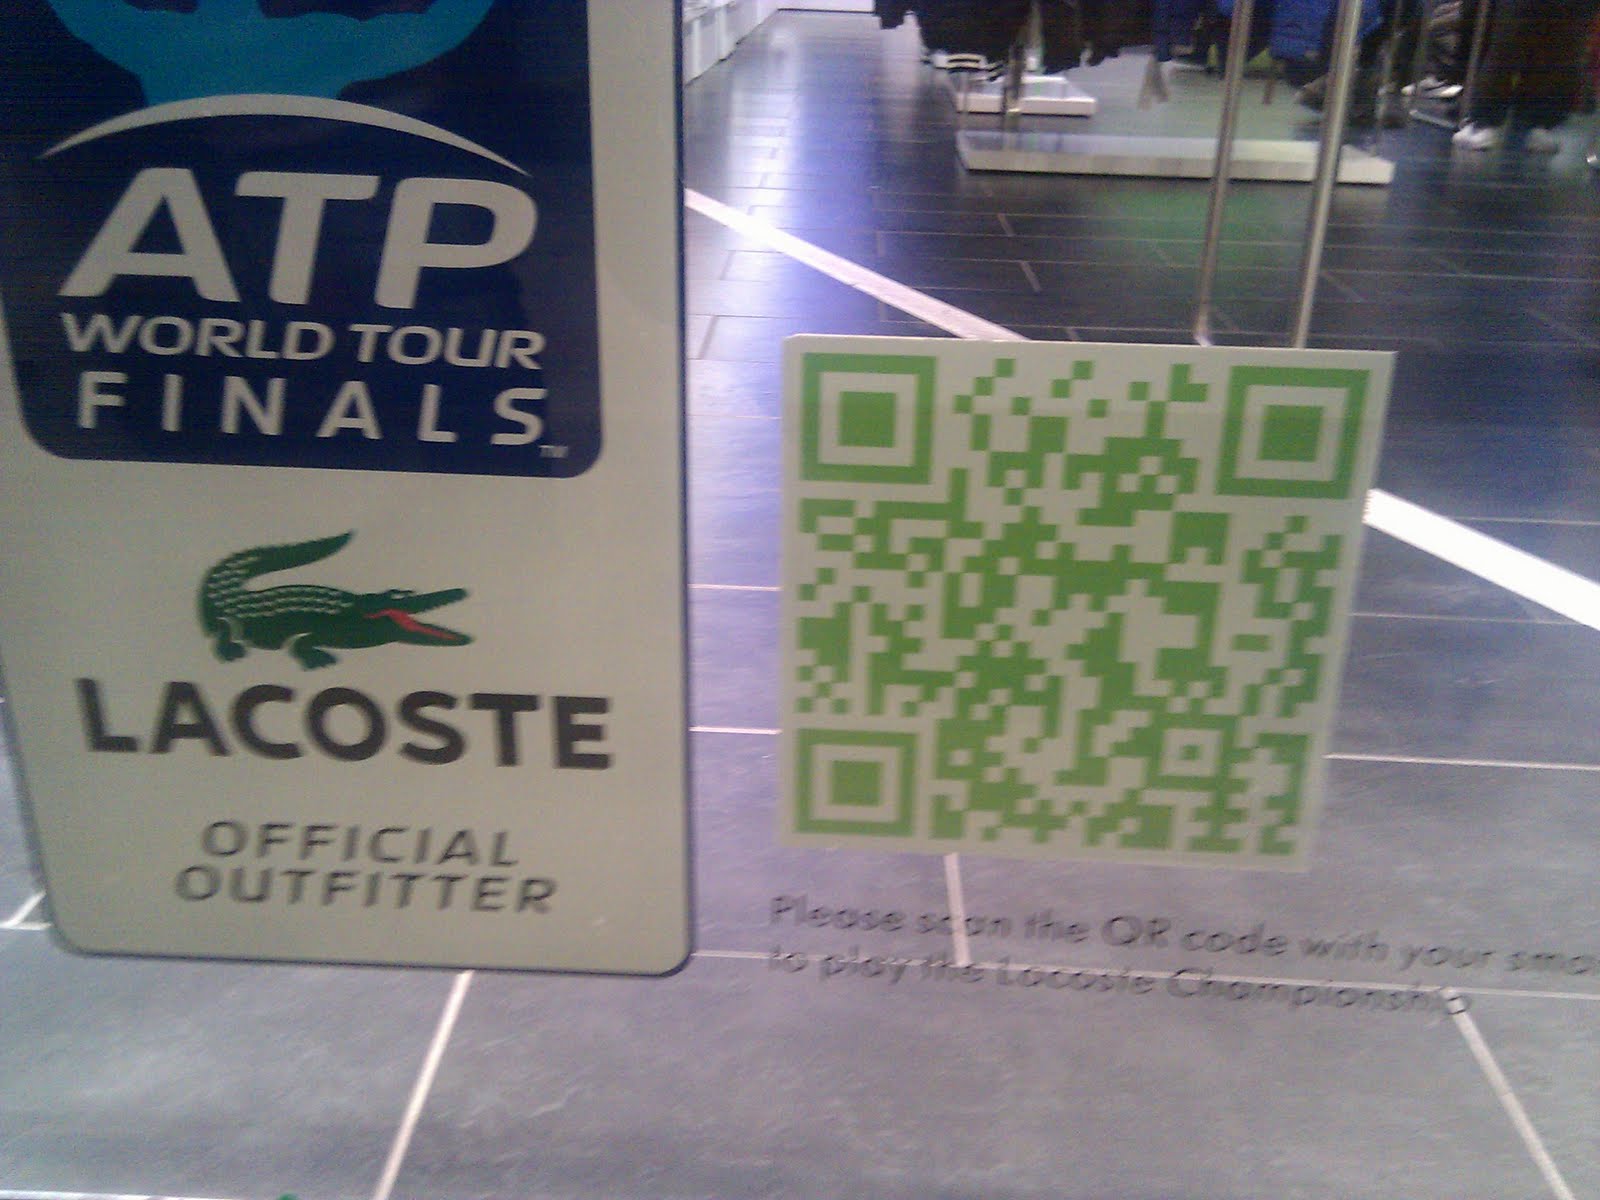 knoflook gras bubbel nick burcher: Lacoste store QR code window displays (pointing to Lacoste  Tennis game)